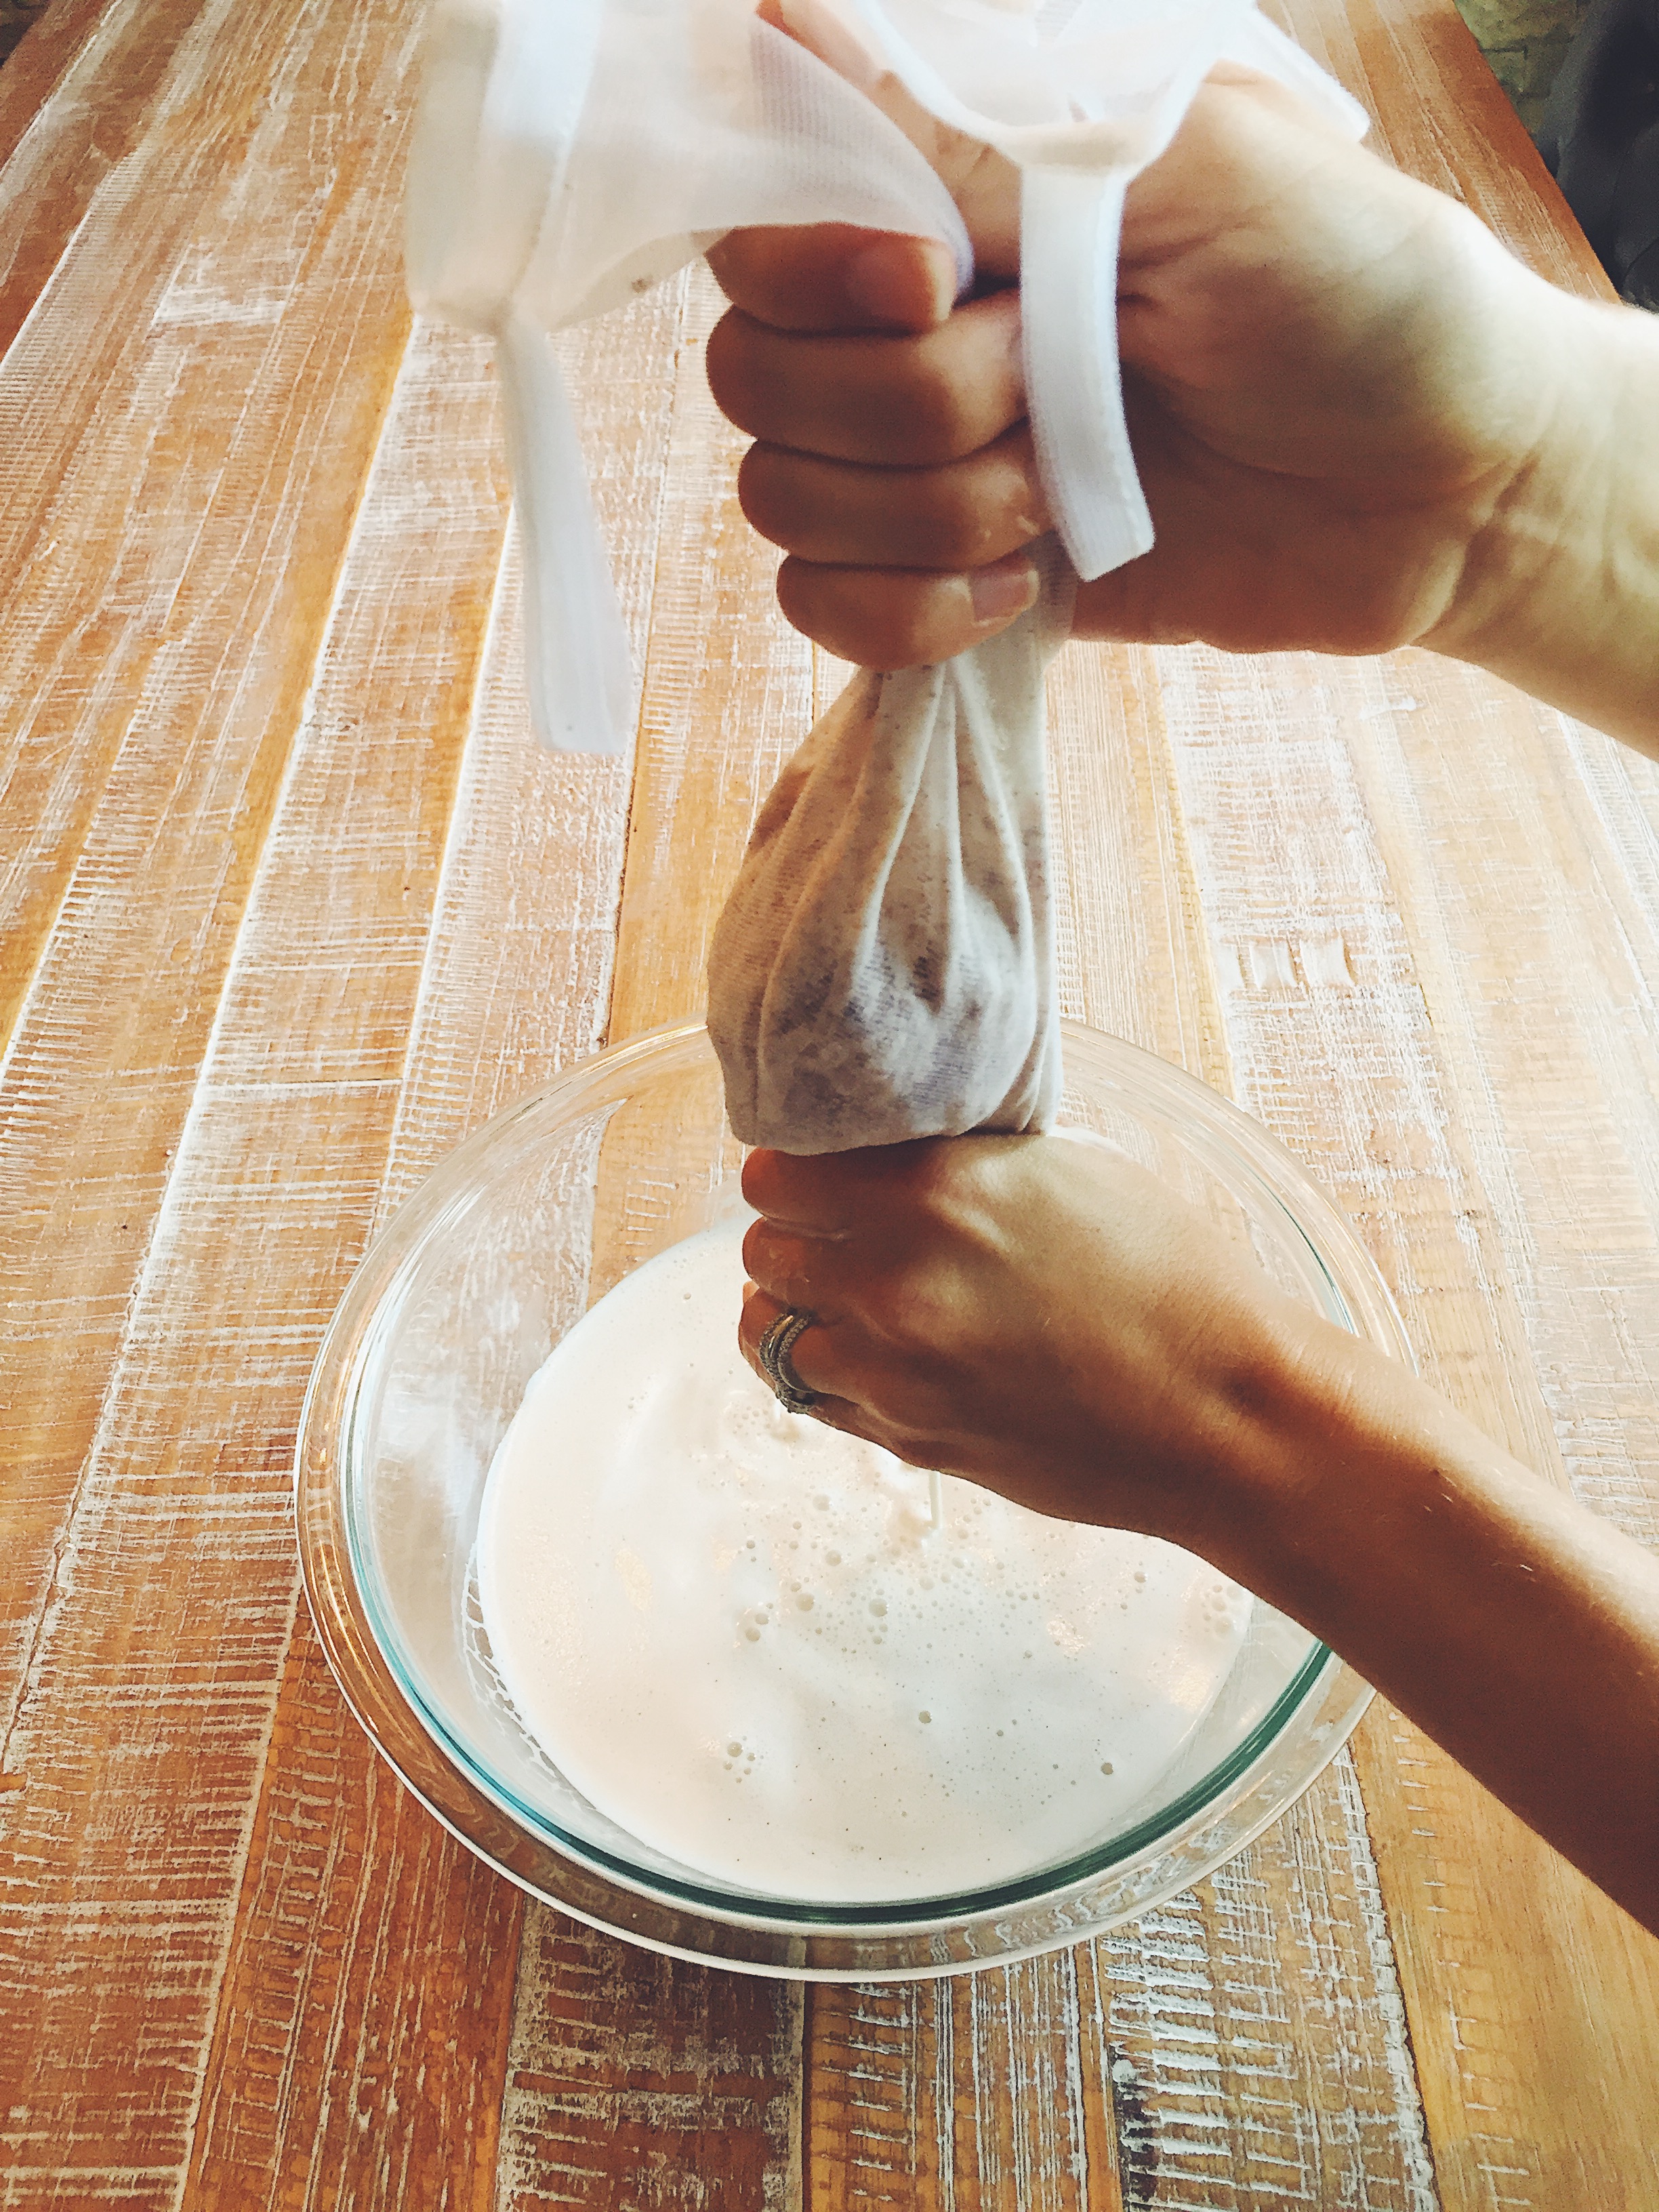 Gently squeeze the milk out of the nut milk bag